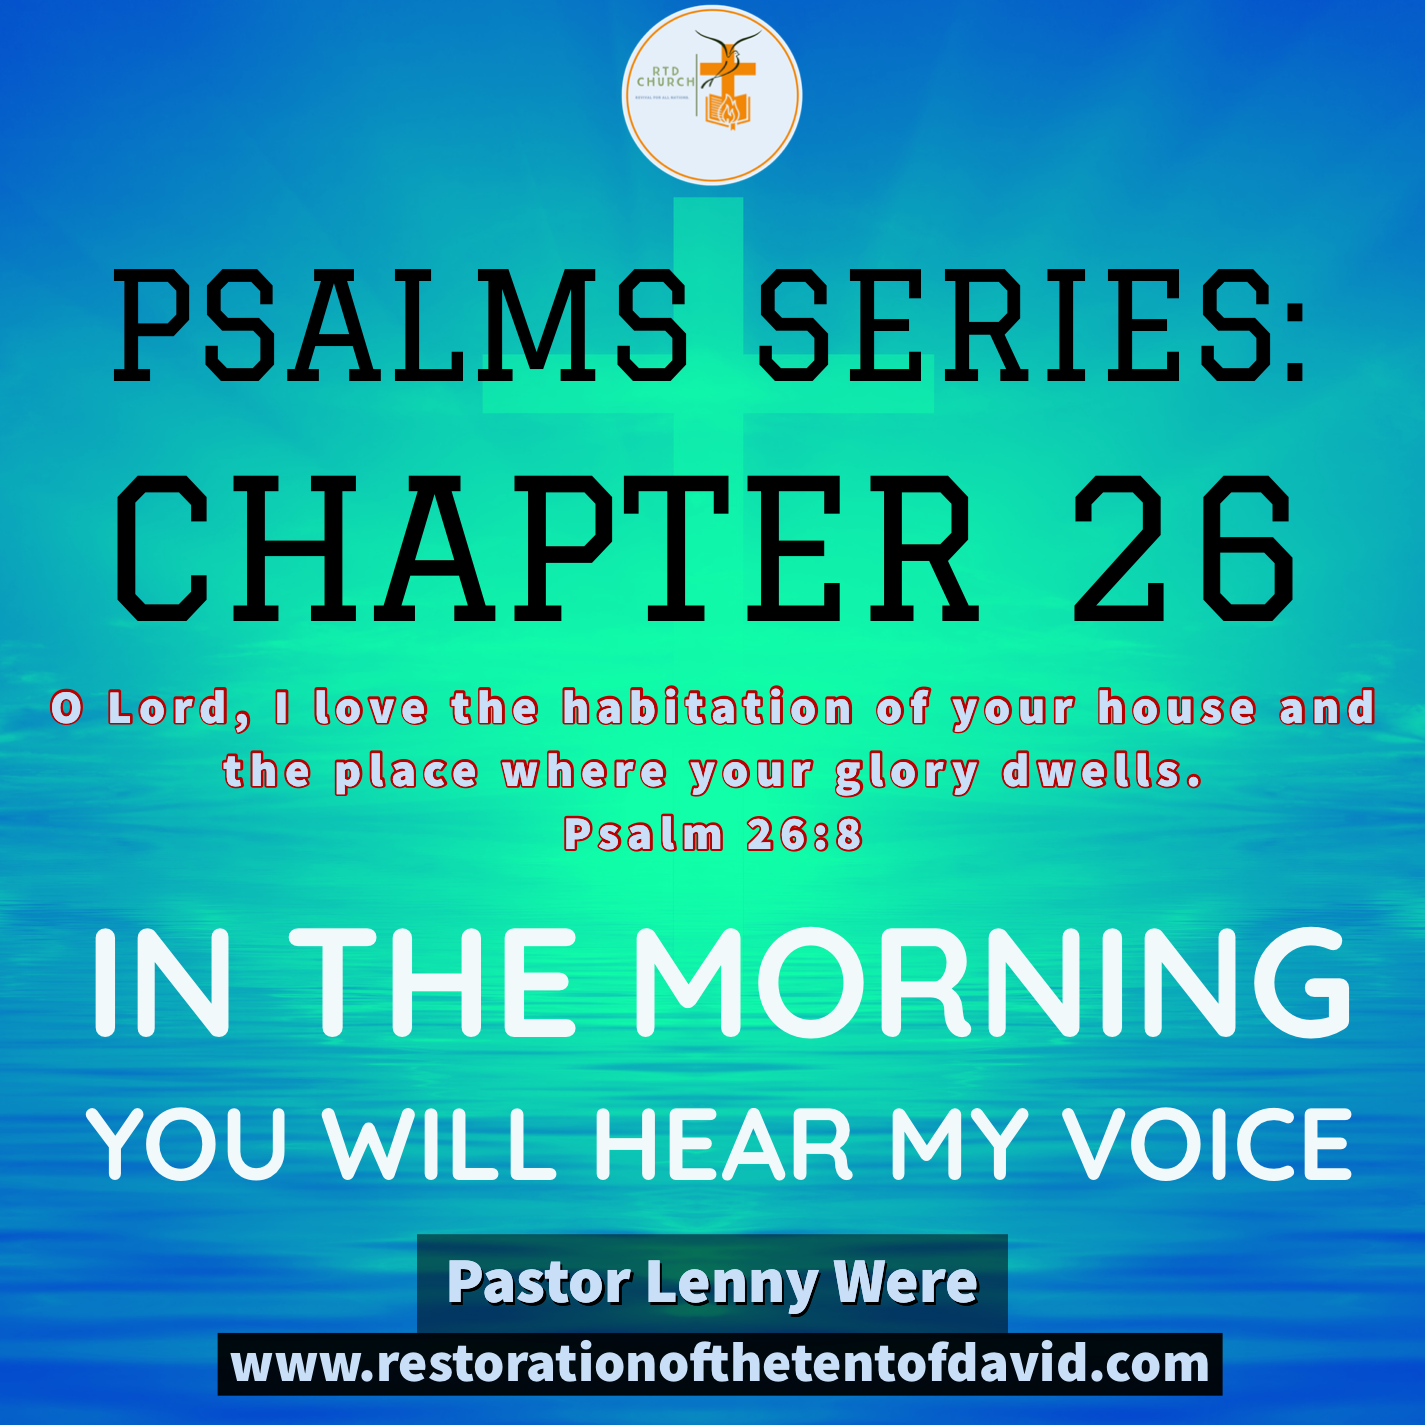 In the morning will you hear my Voice, Psalms Chapter 26